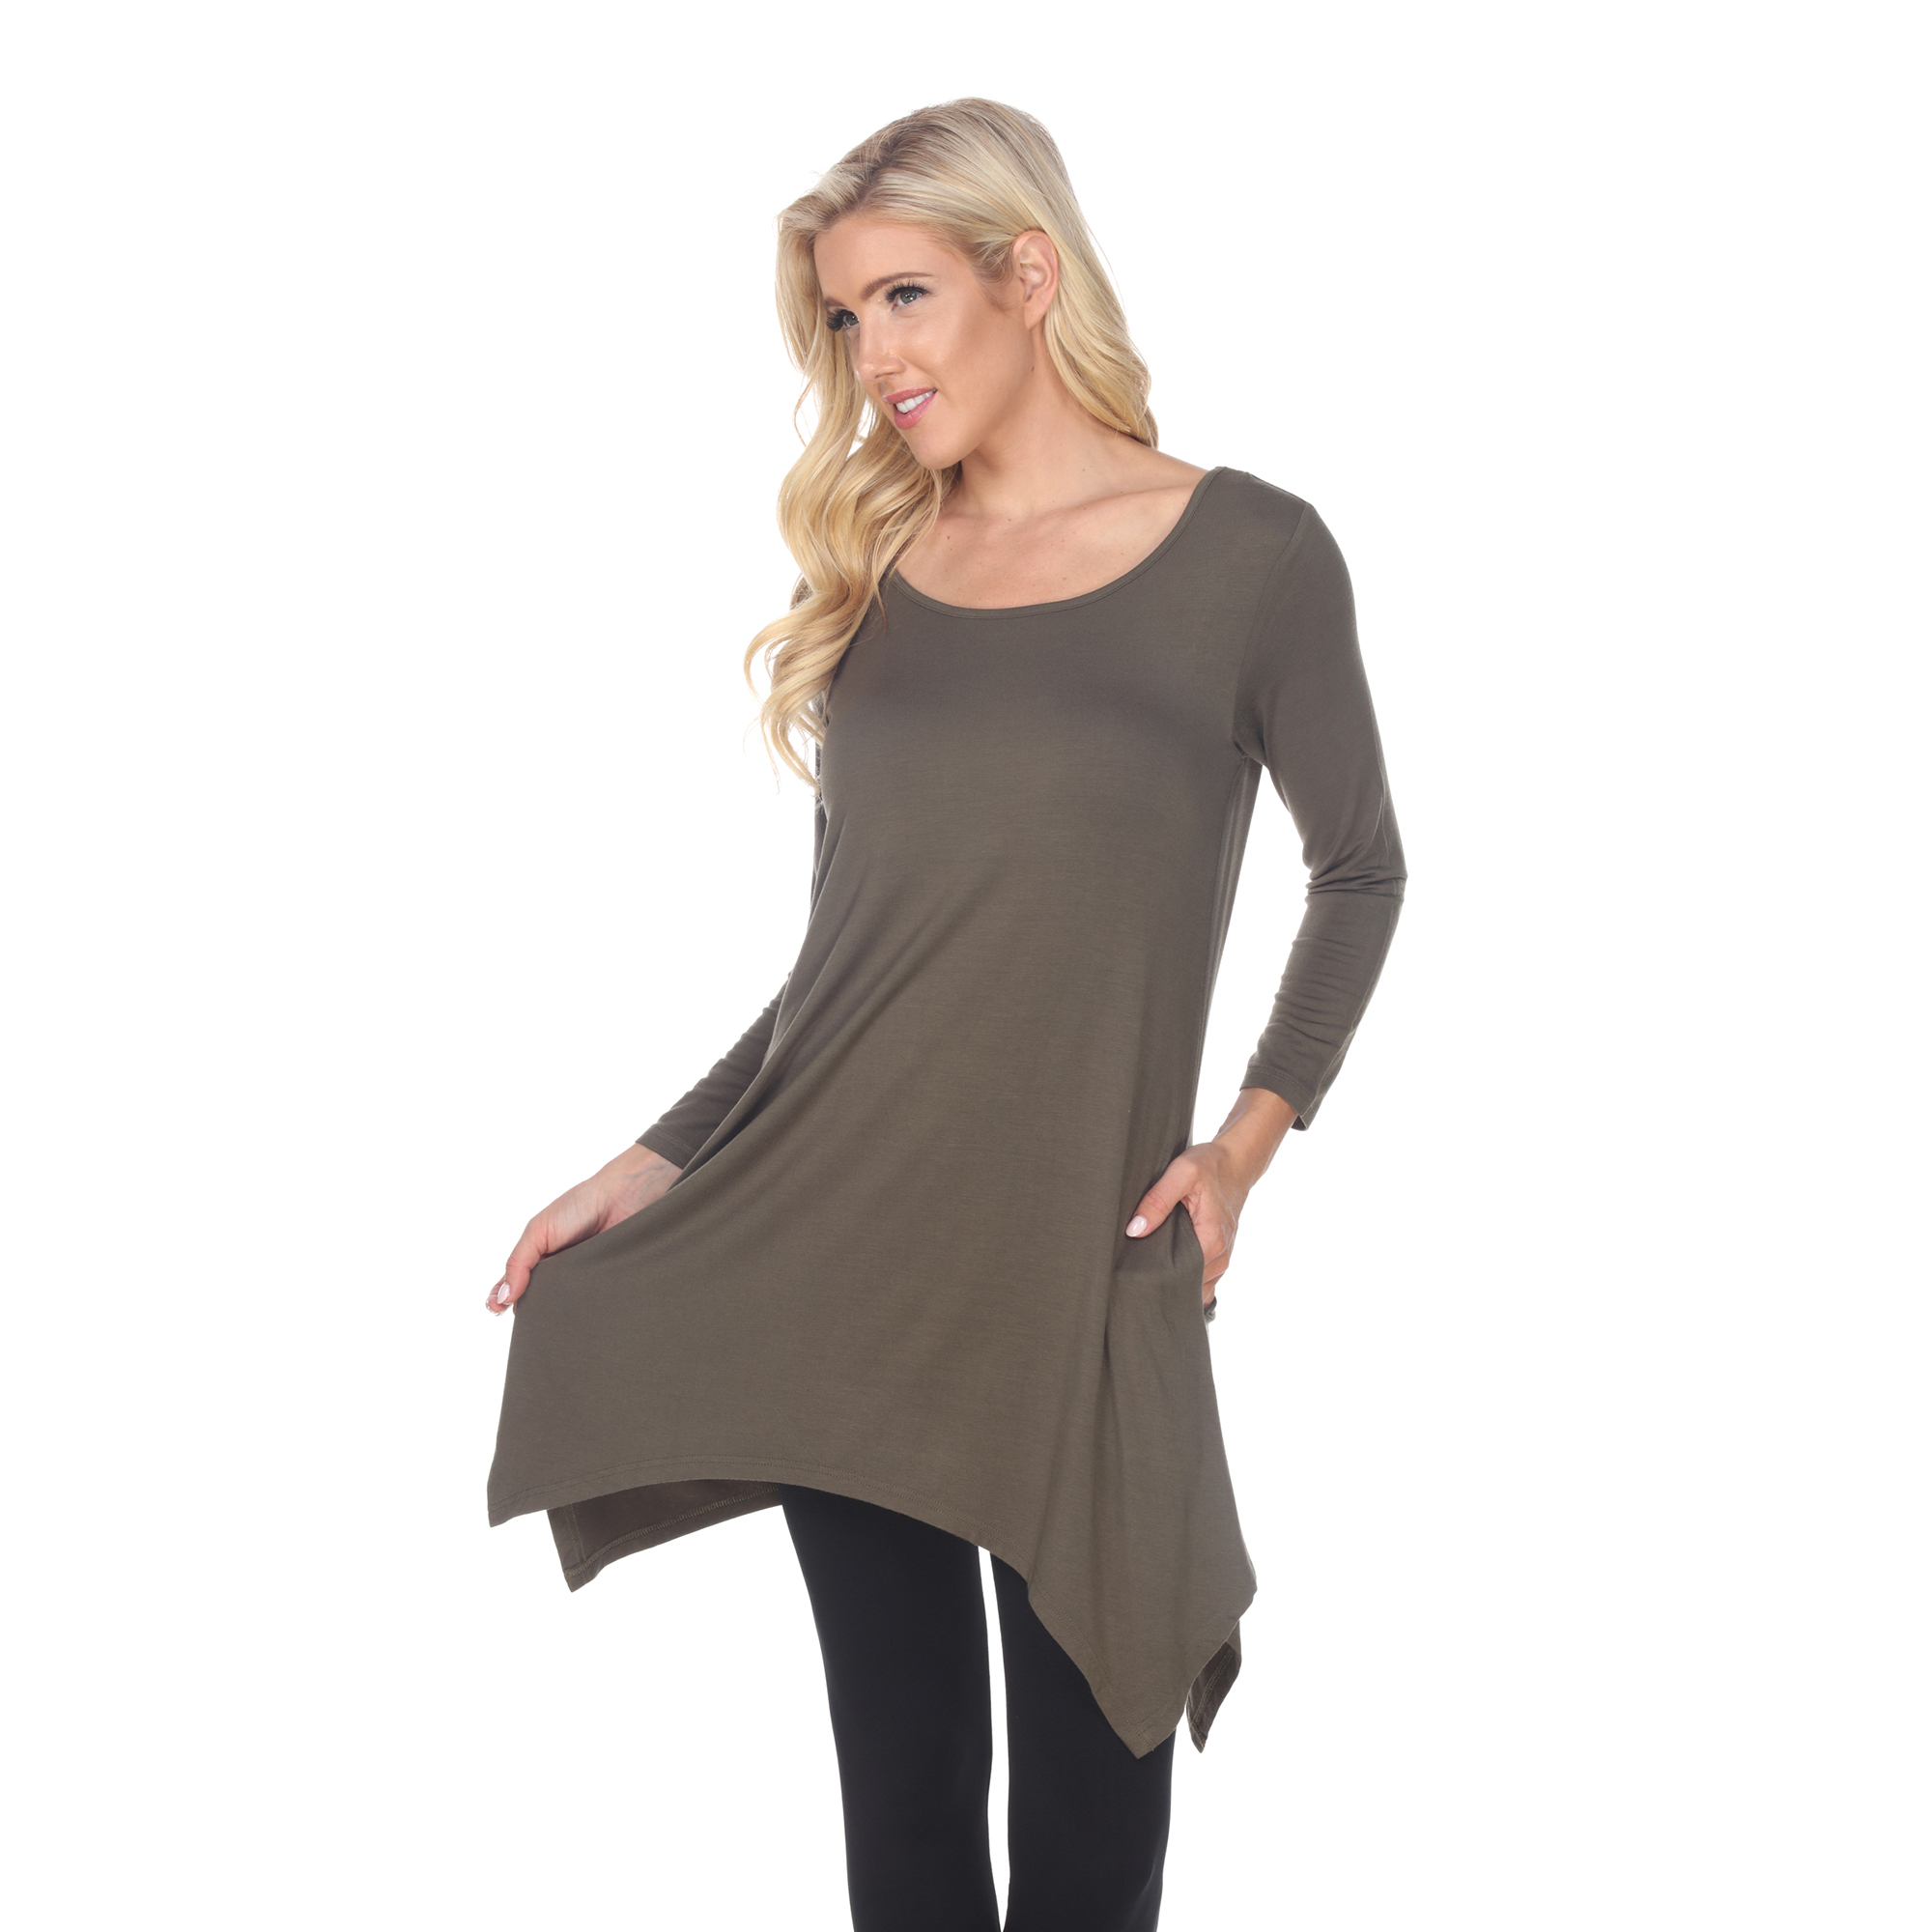 White Mark Women's Quarter Sleeve Tunic Top With Pockets - Olive, 6X